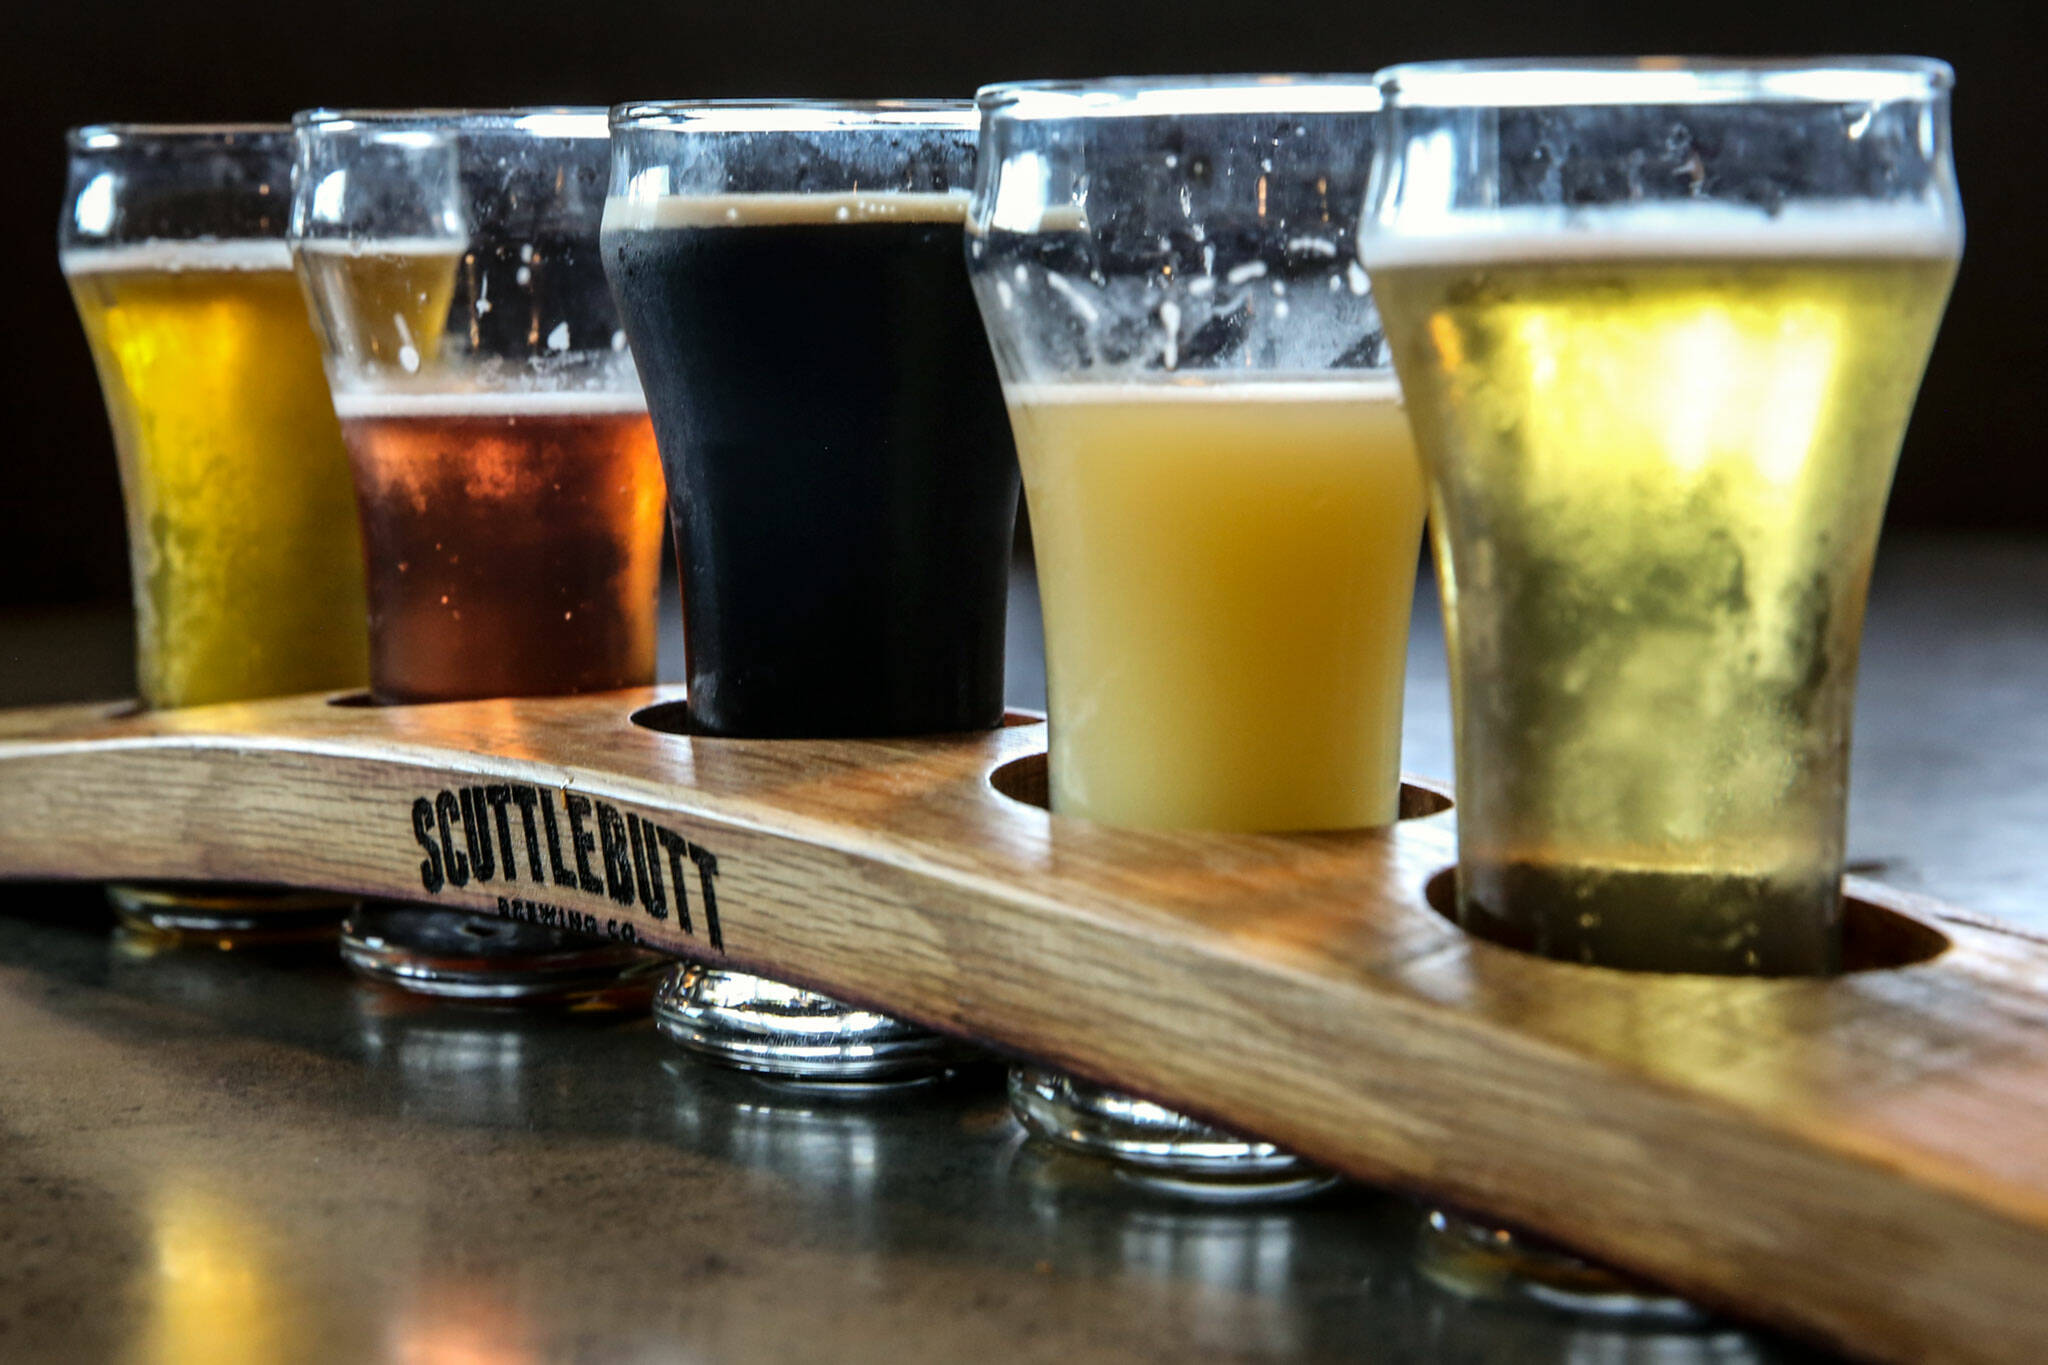 A sampler at Scuttlebutt Brewing Restaurant and Pub Friday afternoon on July 2, 2021 in Everett, Washington. (Kevin Clark / The Herald)